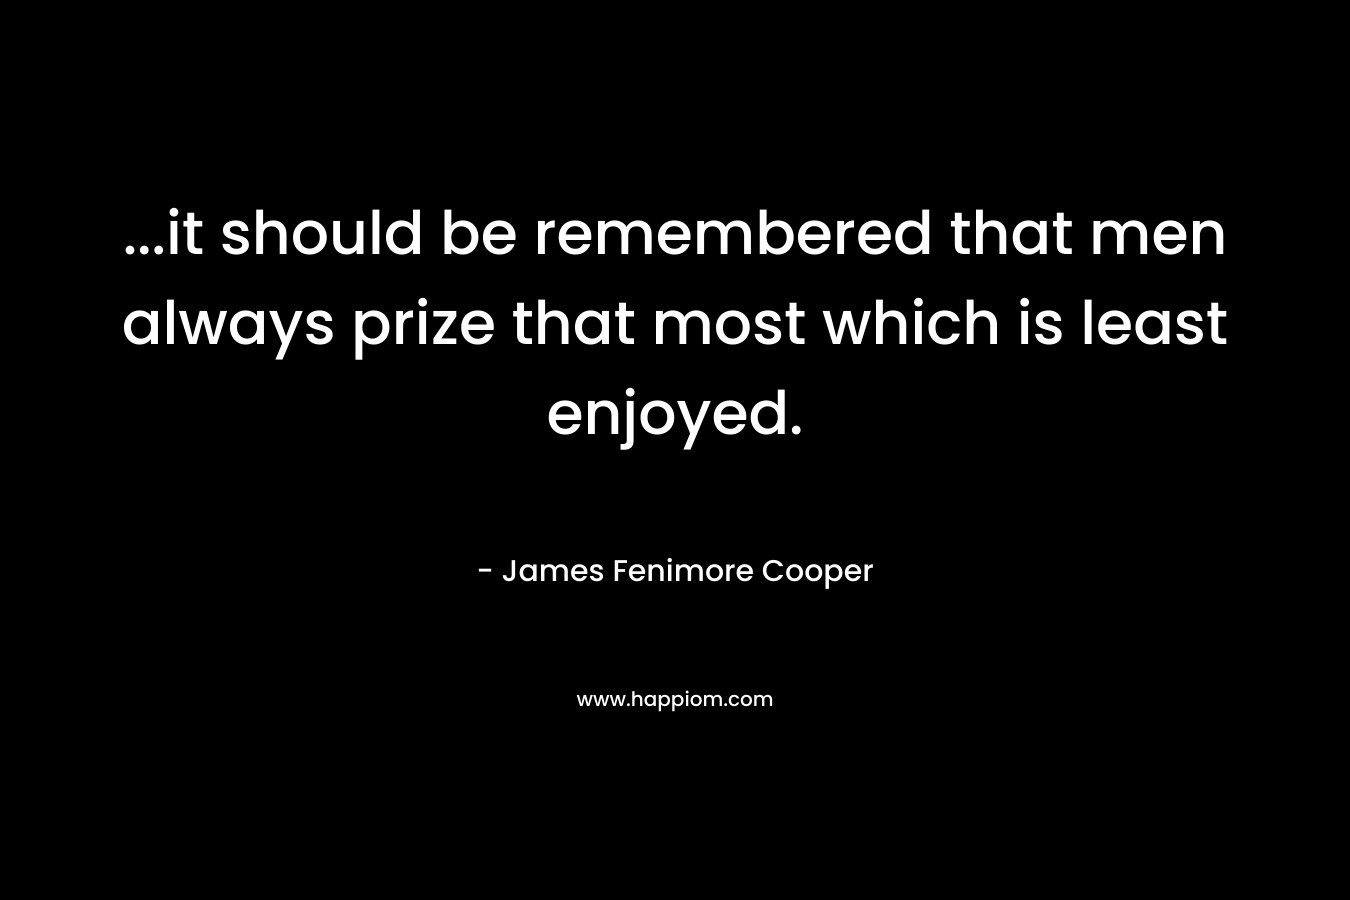 ...it should be remembered that men always prize that most which is least enjoyed.